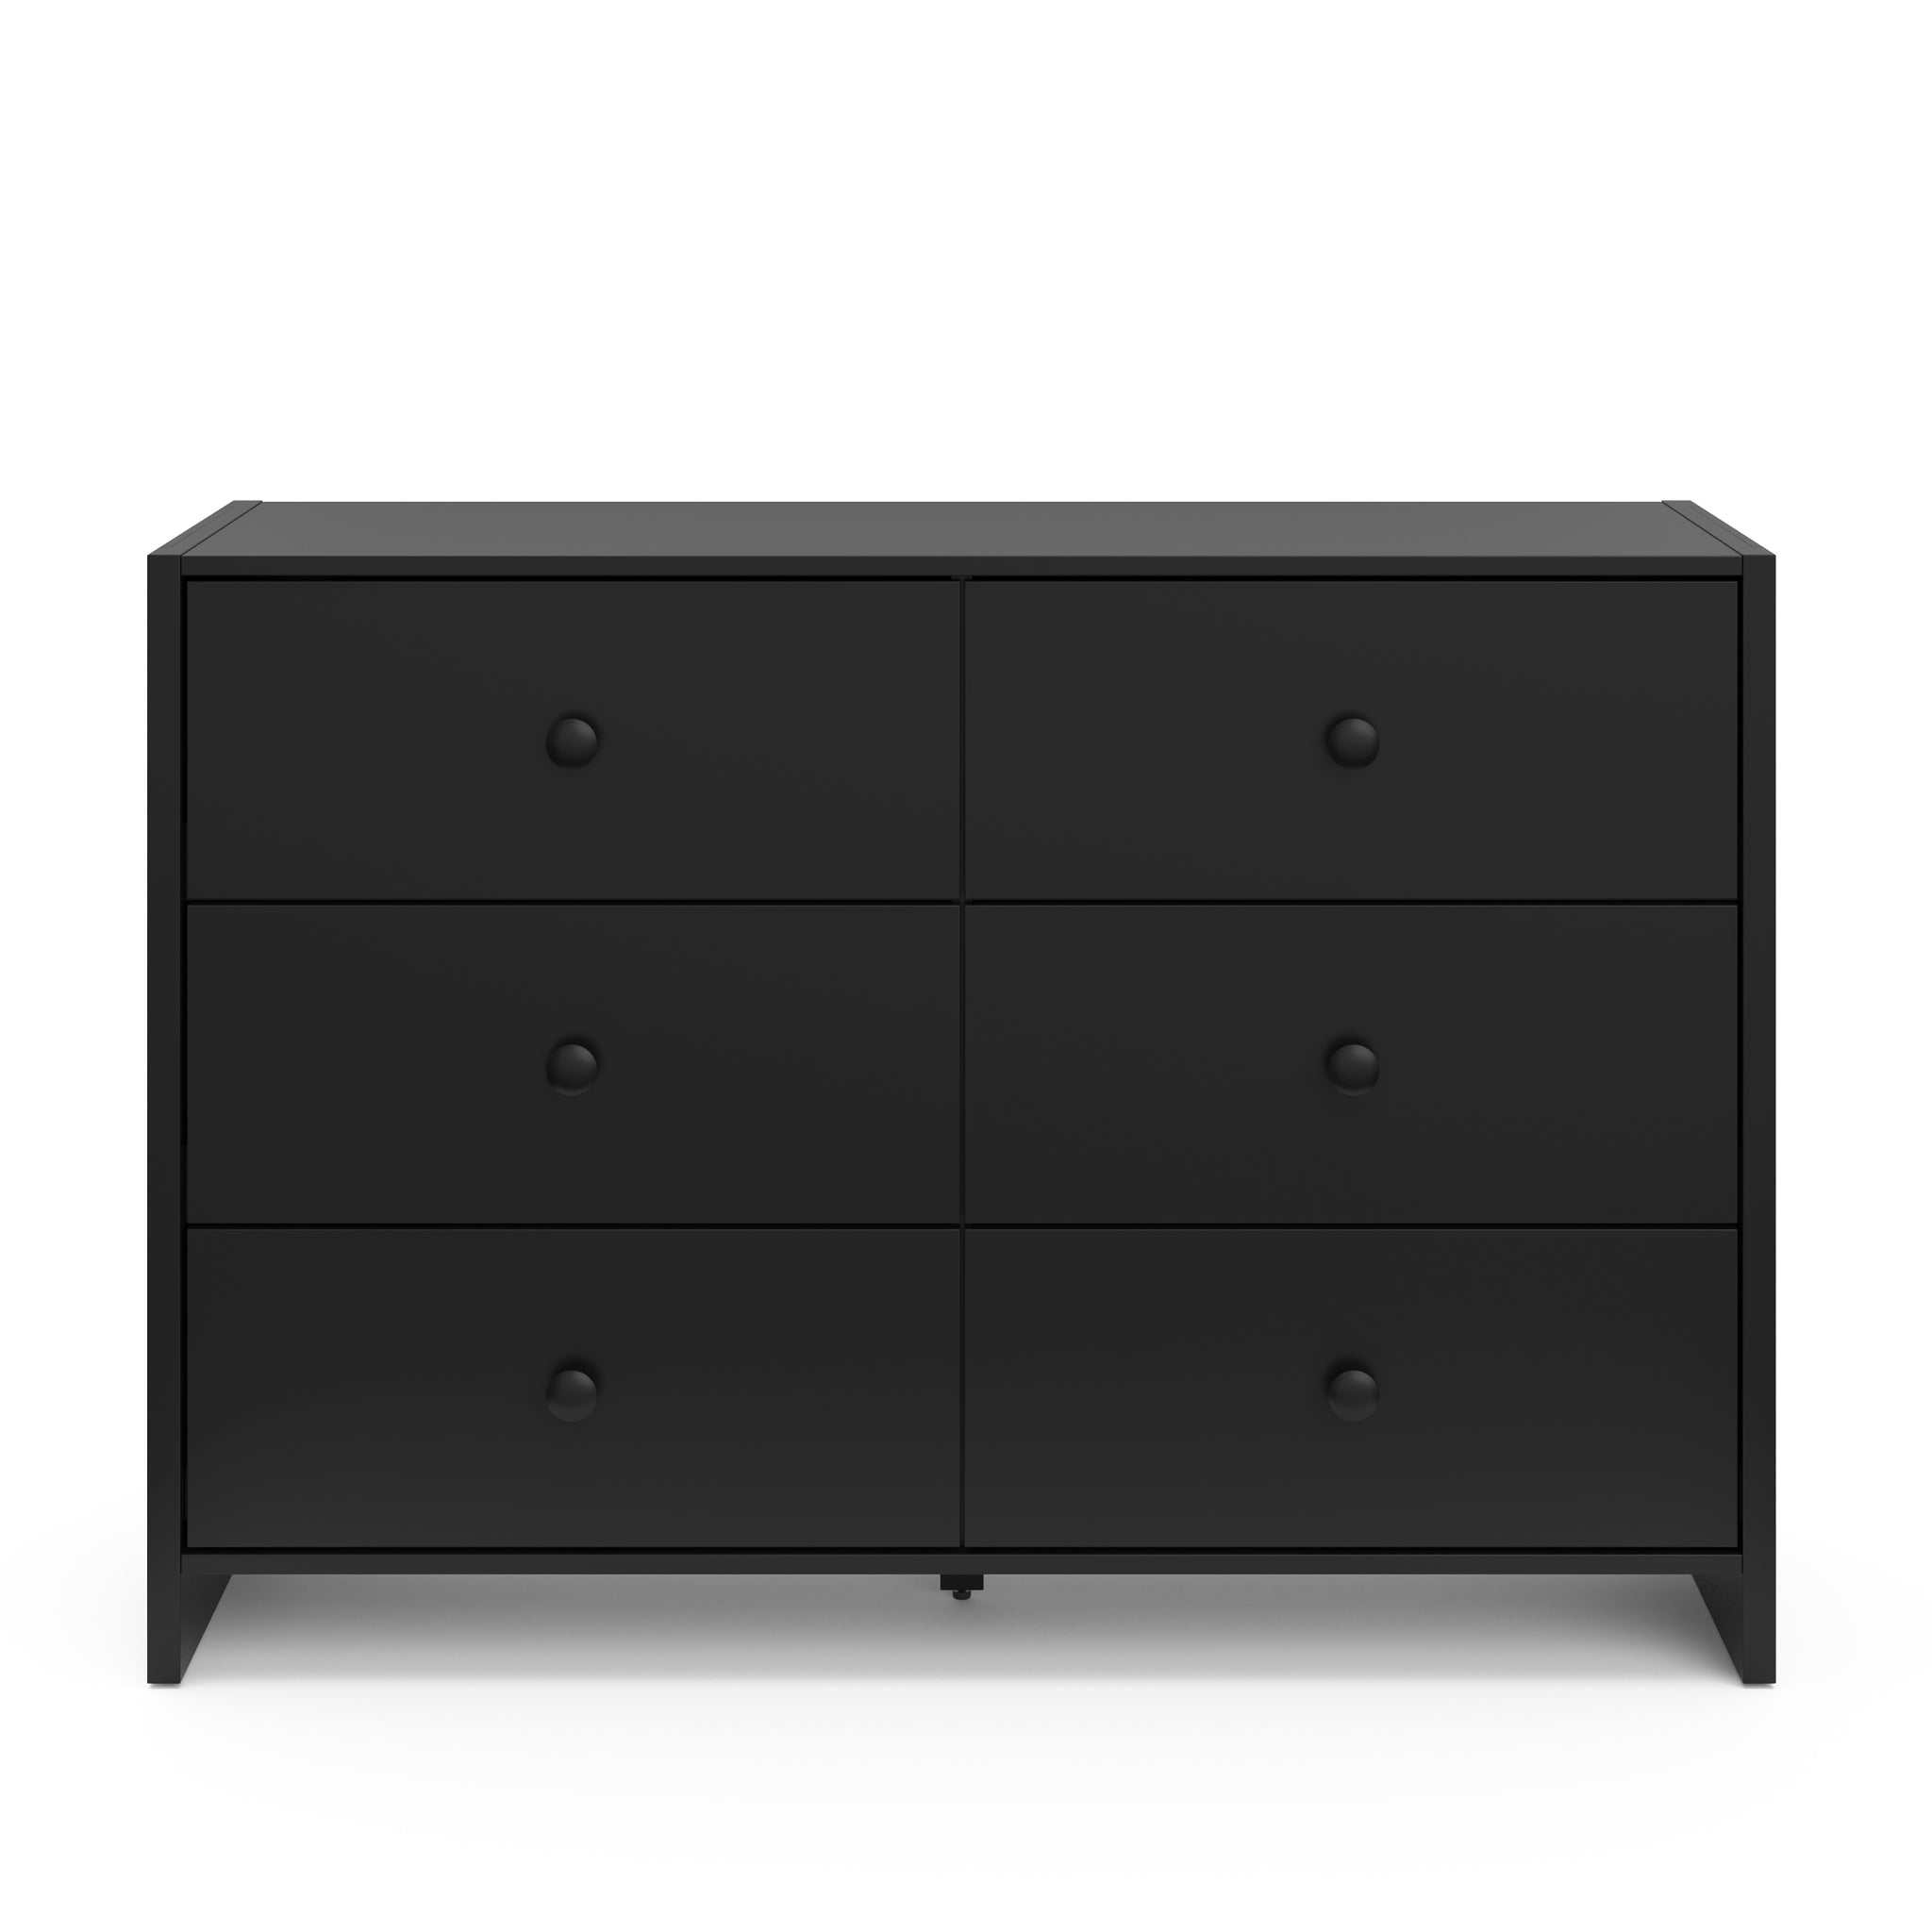 Front view of black dresser with 6 drawers